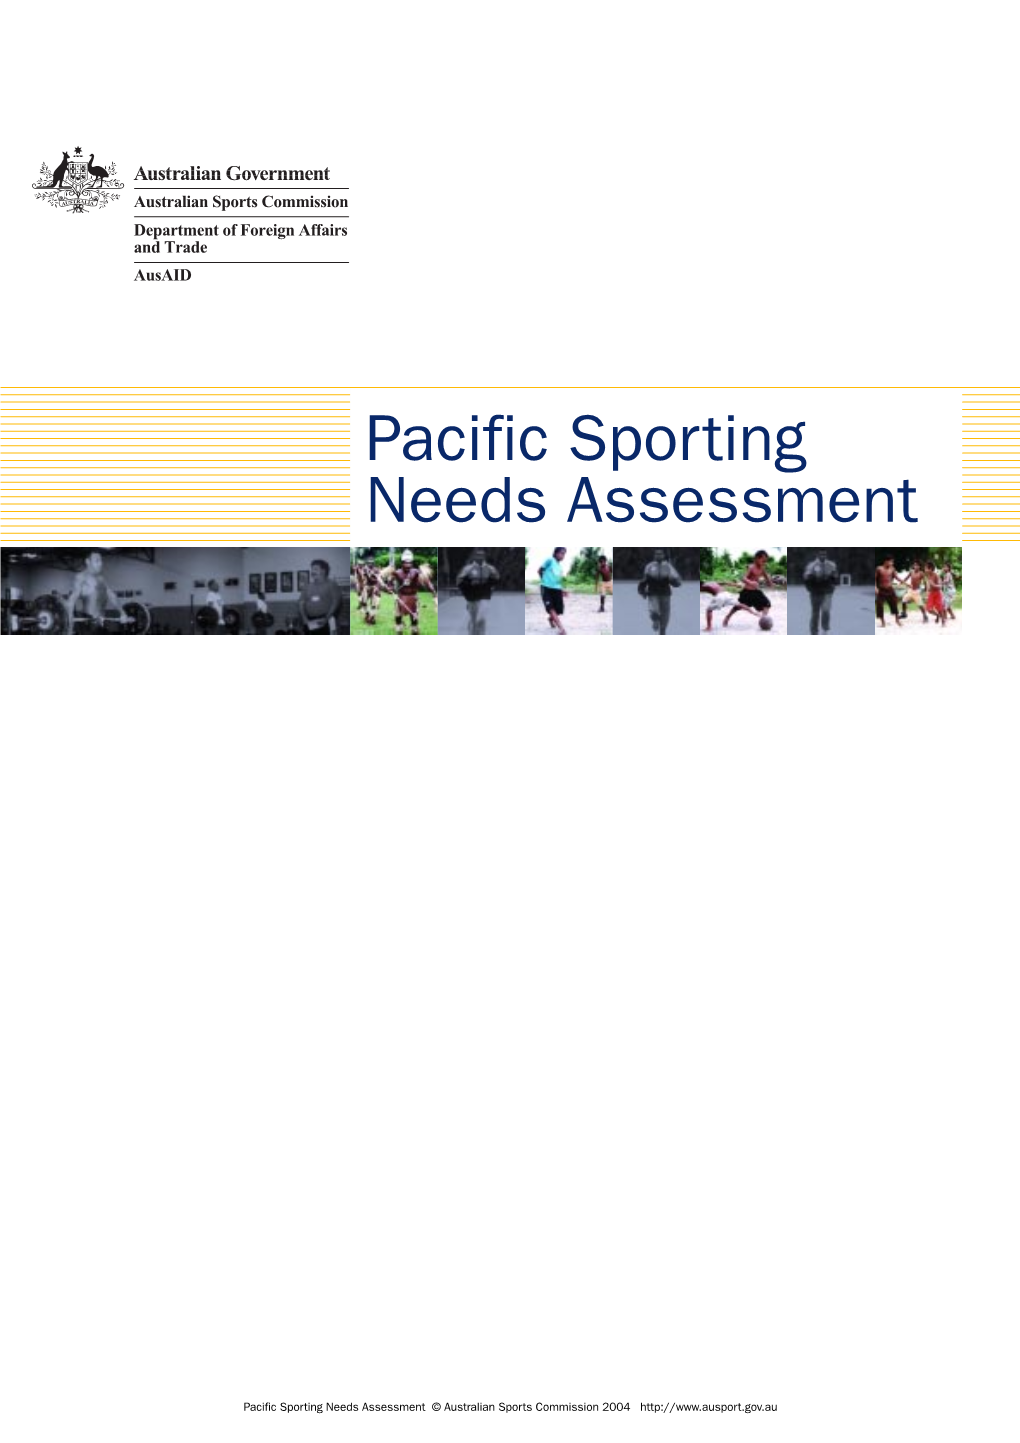 Pacific Sporting Needs Assessment